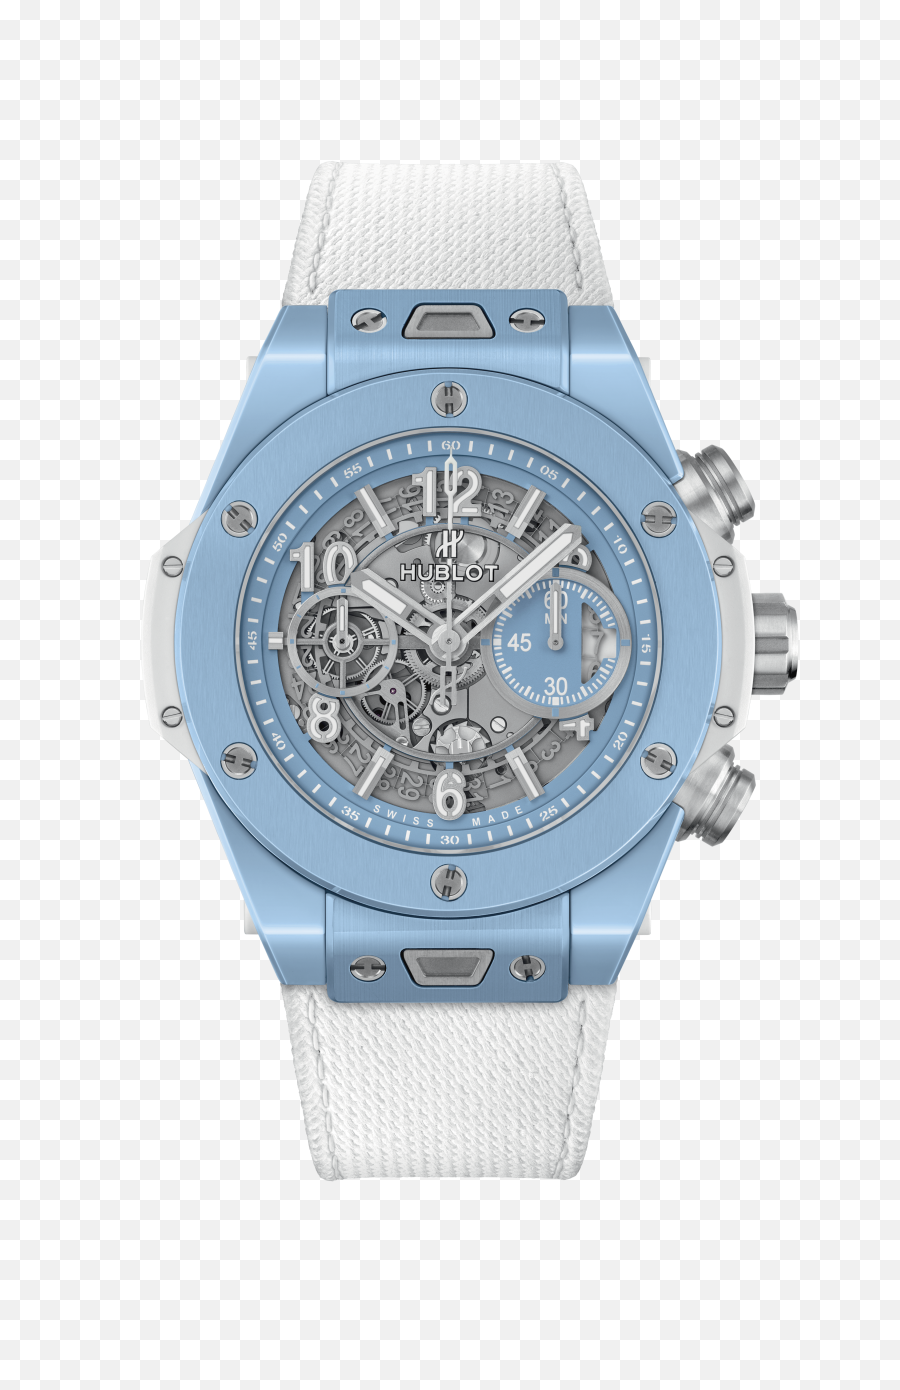 Hublot - Swiss Luxury Watches U0026 Chronographs For Men And Women 411 Ex 5120 Nr Png,Watch Transparent Online Free